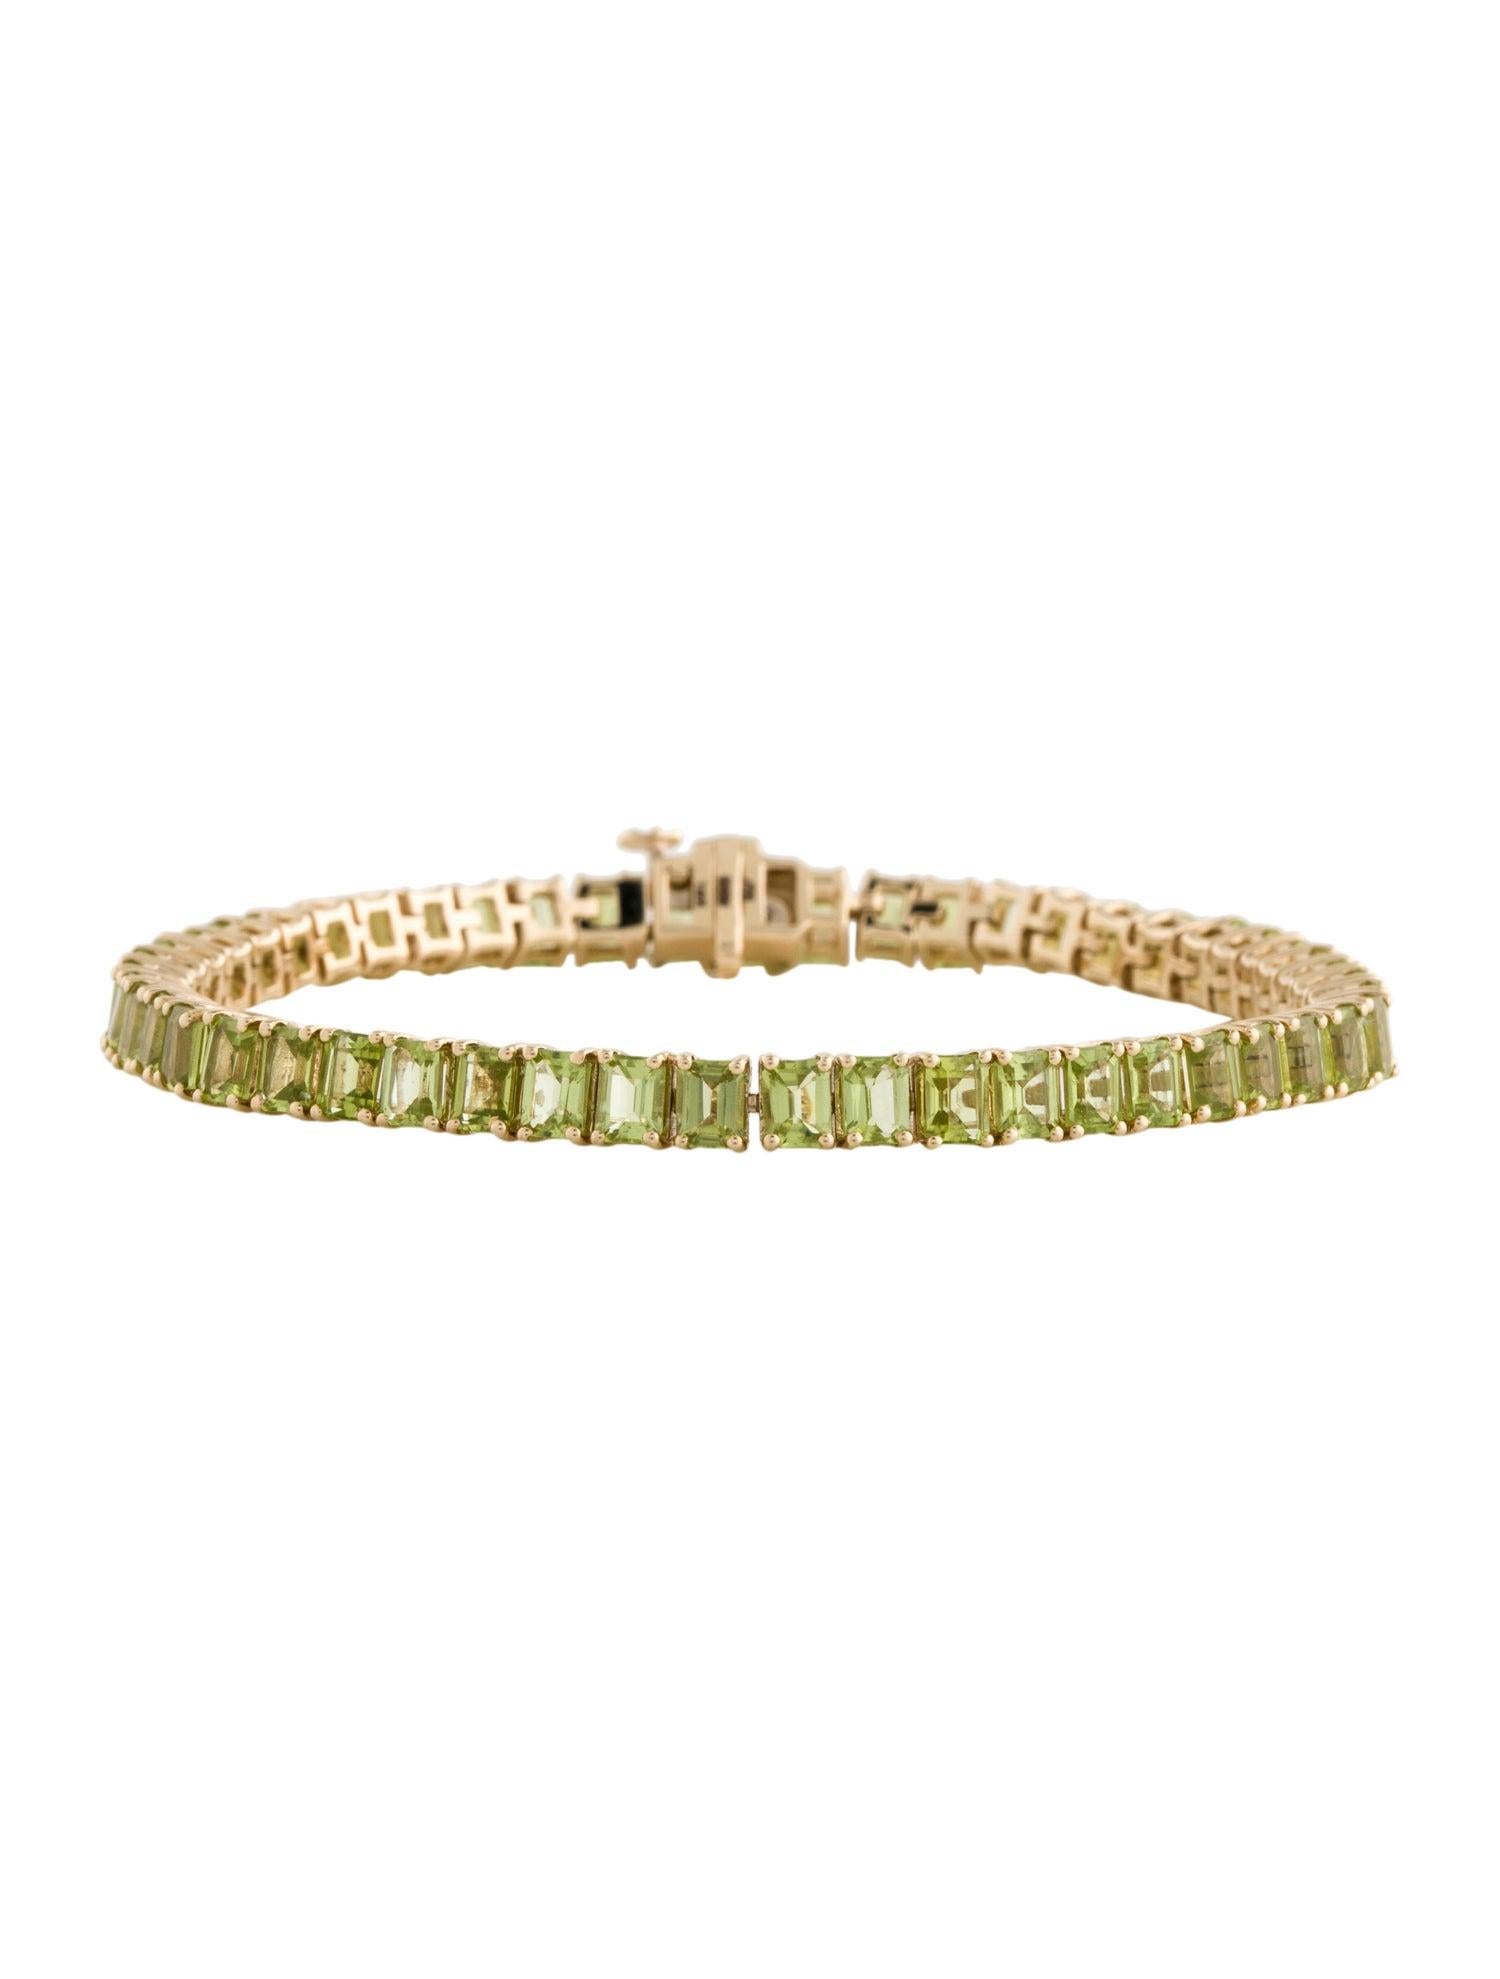 14K 12.78ctw Peridot Link Bracelet - Vibrant Gemstone Elegance, Timeless Luxury In New Condition For Sale In Holtsville, NY